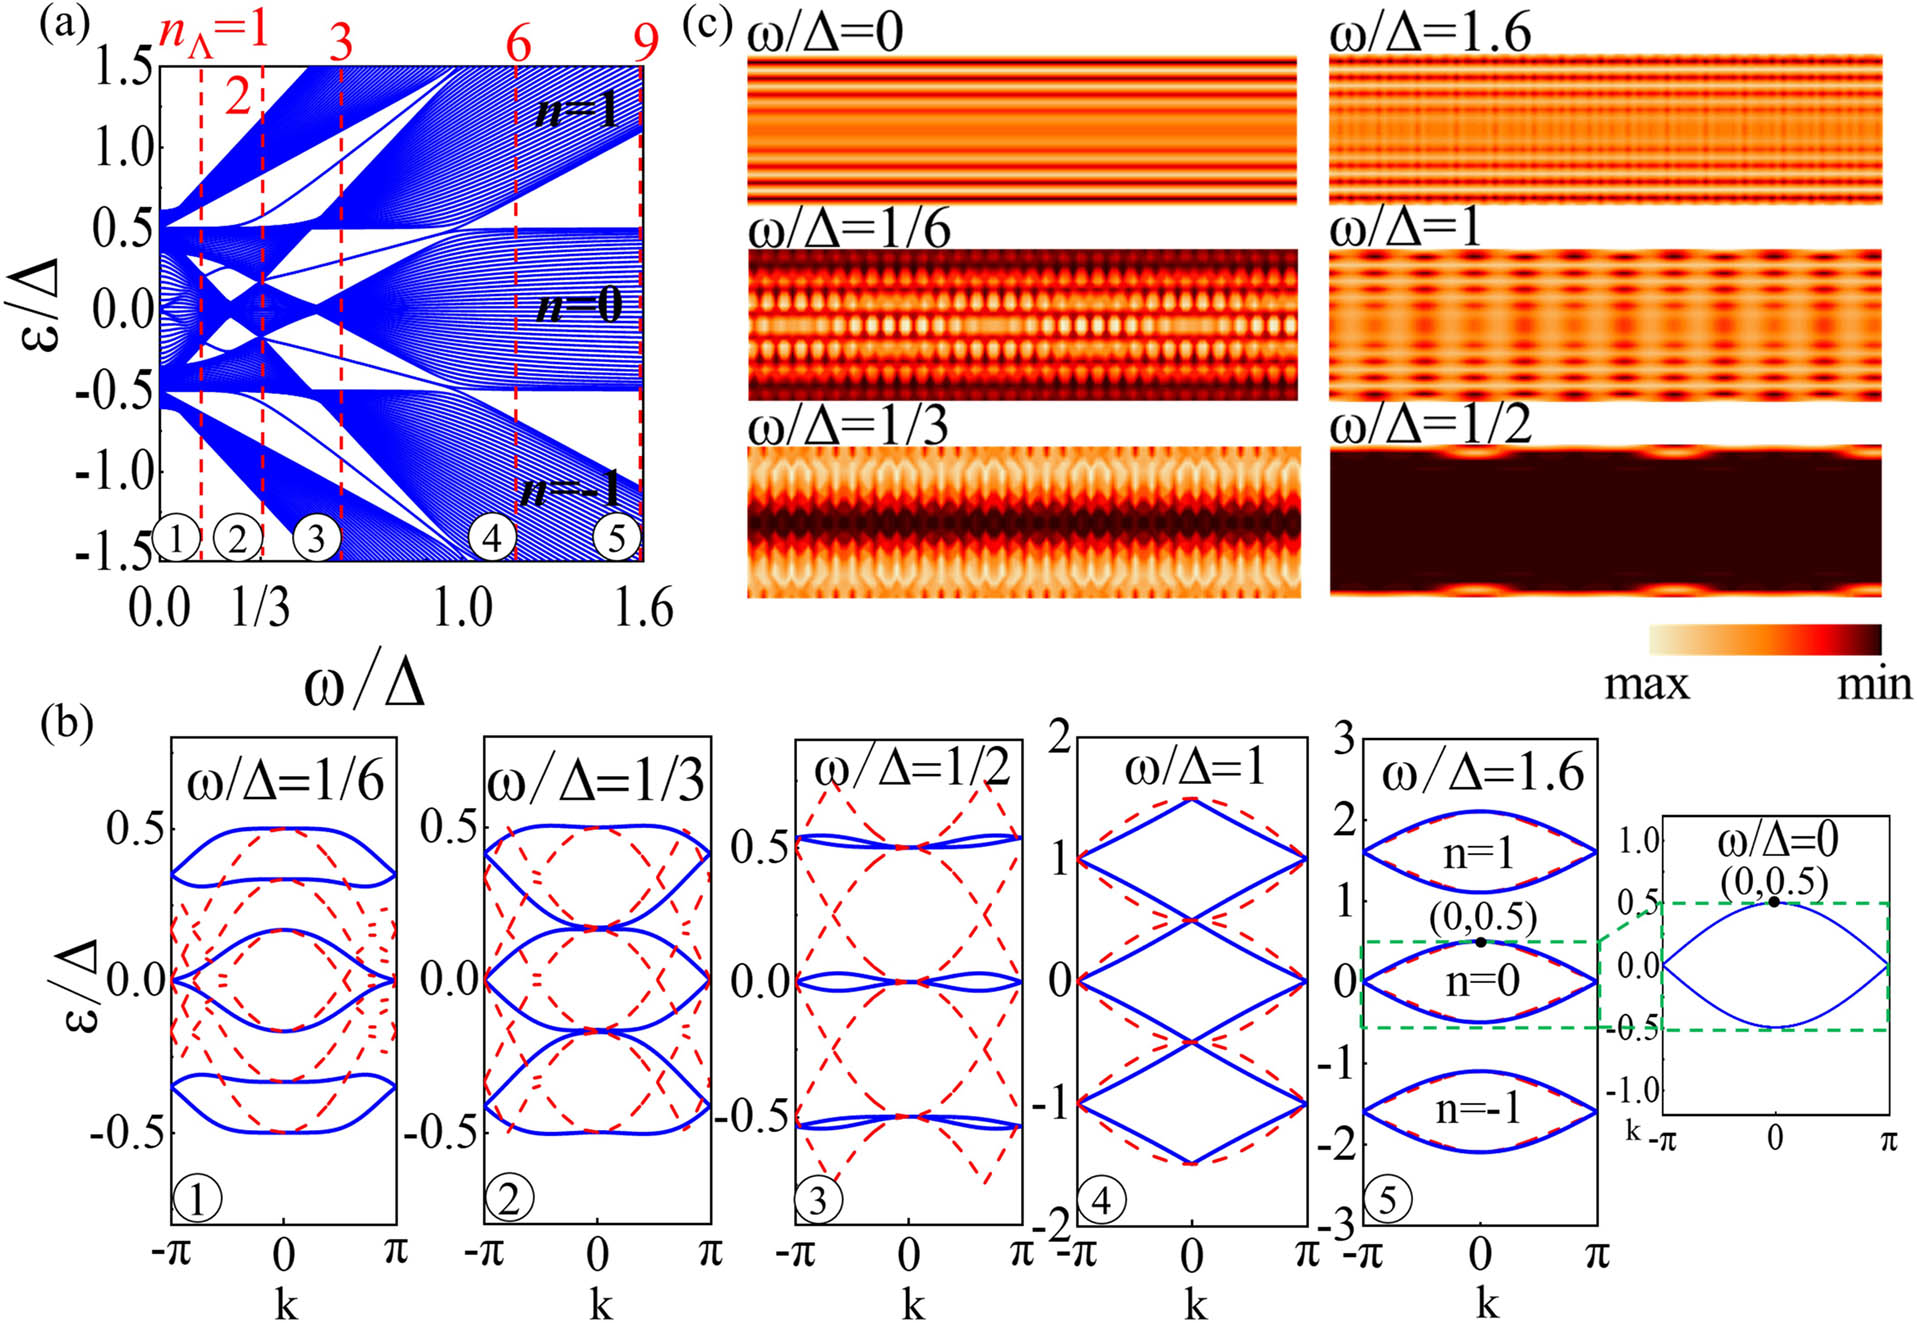 (a) Quasi-energies under open-boundary conditions with 40 waveguides where the bandwidth Δ is taken as the energy unit. (b) The momentum space quasi-energy band structure (blue solid lines) of the five chosen frequency replicas and the straight cases with ω/Δ=1/6, ω/Δ=1/3, ω/Δ=1/2, ω/Δ=1, ω/Δ=1.6, and ω/Δ=0. Red dashed lines correspond to the case with no dimerization (δκ=0) and uncoupled Floquet replicas to guide the eye for each Floquet replica. (c) The dynamic evolution of the array system for the 20 waveguides with the six frequencies shown in (b).